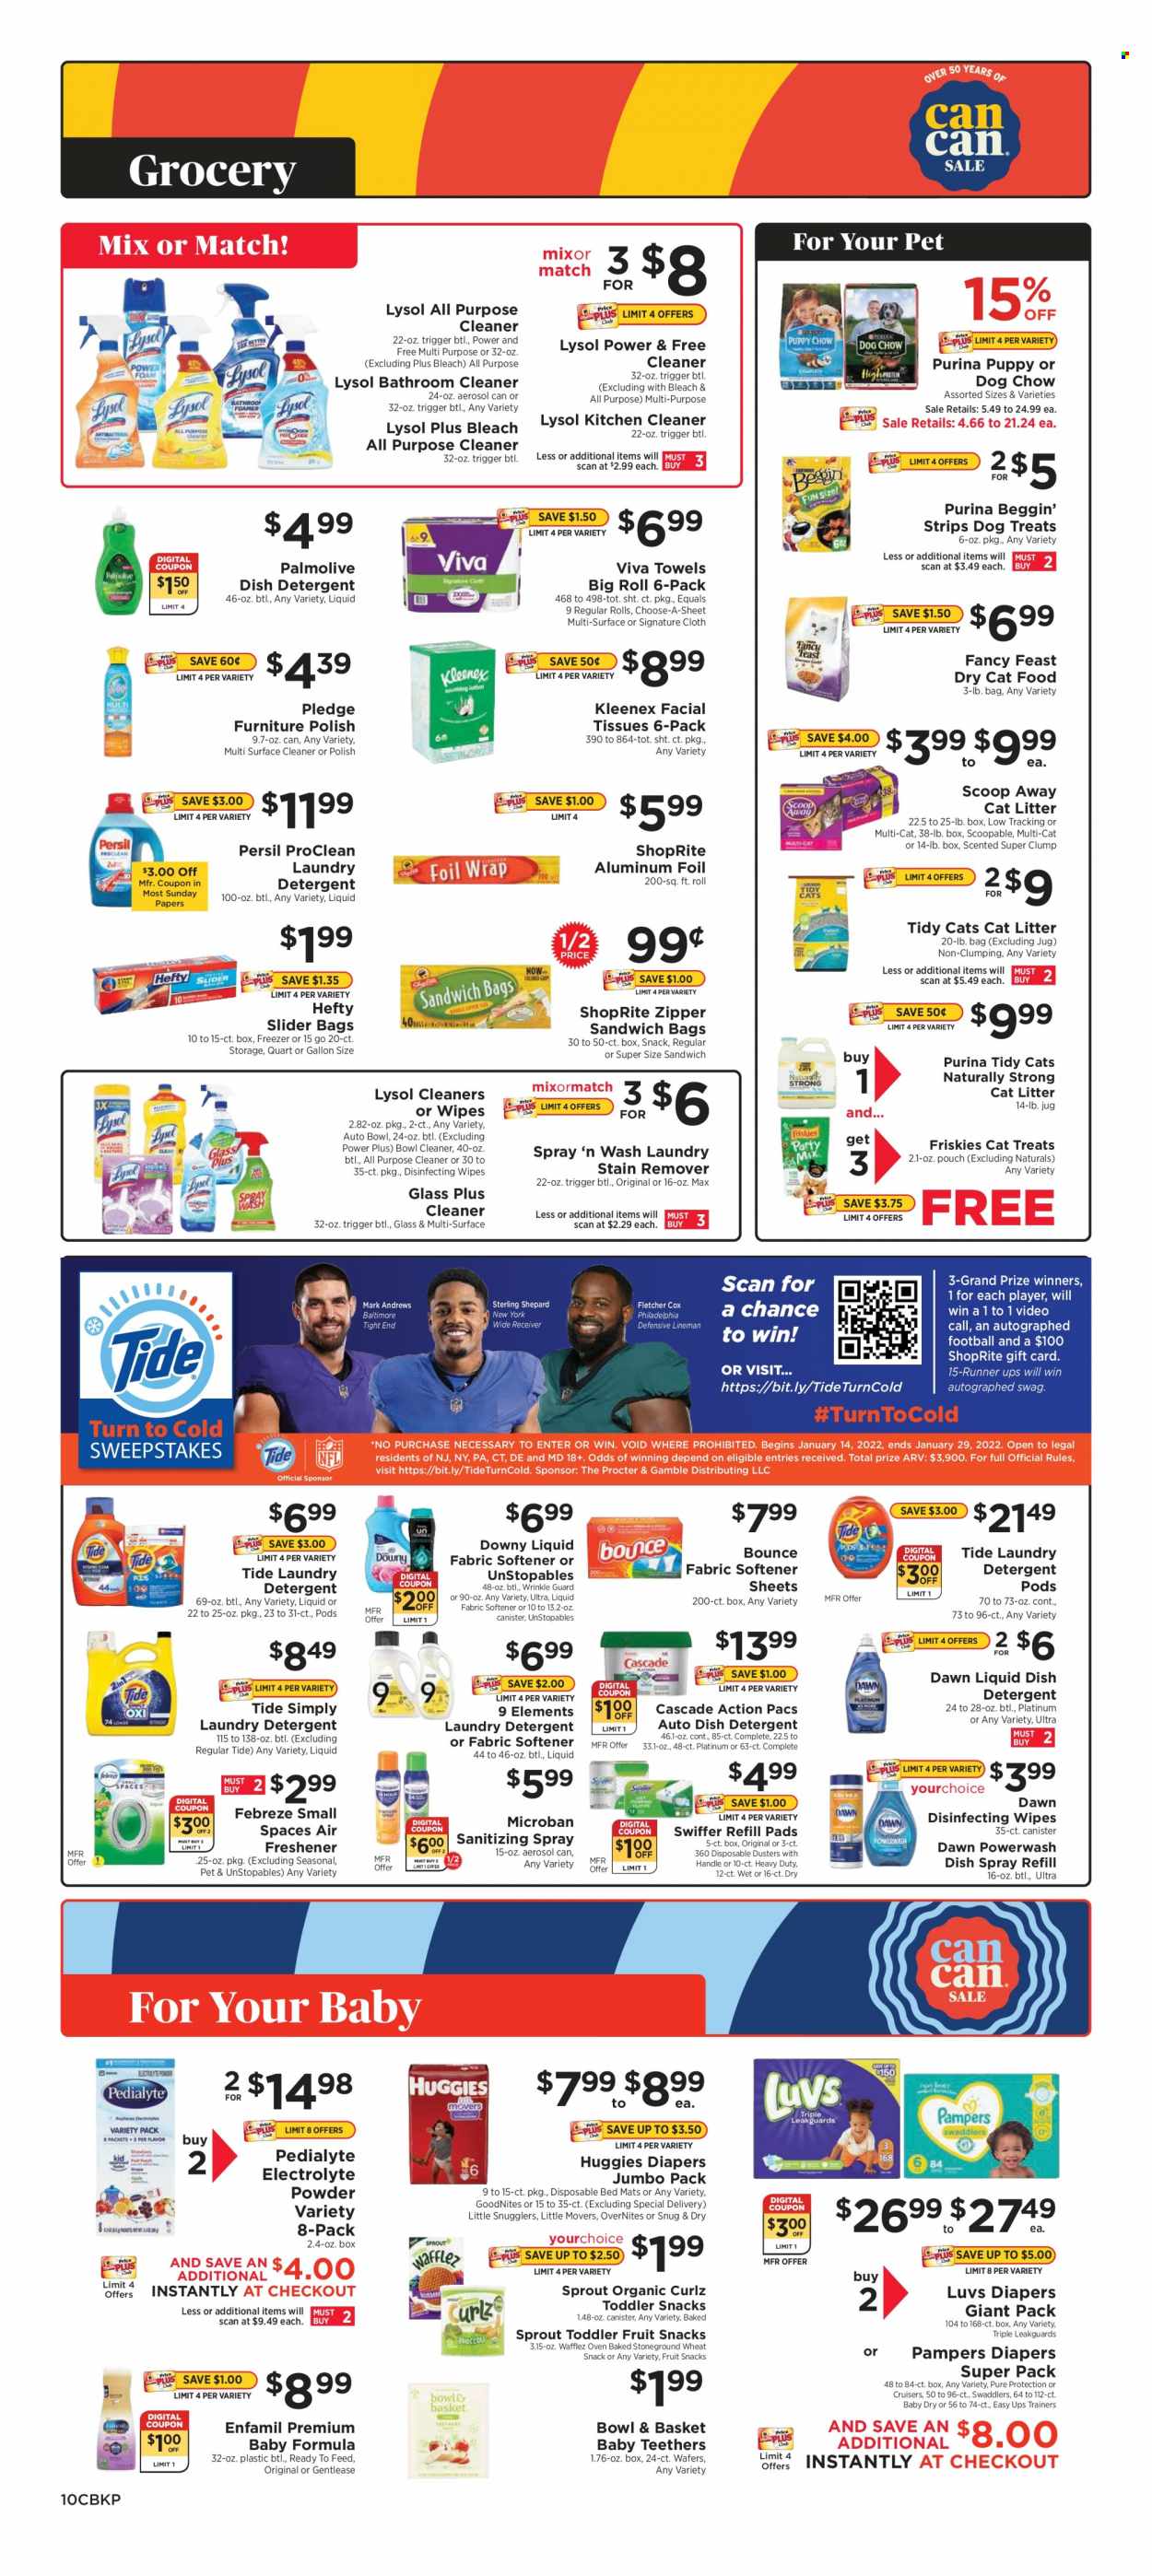 thumbnail - ShopRite Flyer - 01/16/2022 - 01/22/2022 - Sales products - Bowl & Basket, Philadelphia, strips, wafers, fruit snack, Enfamil, wipes, Huggies, Pampers, nappies, Kleenex, tissues, detergent, Febreze, surface cleaner, cleaner, bleach, all purpose cleaner, stain remover, Lysol, Pledge, Cascade, Tide, Unstopables, Persil, fabric softener, laundry detergent, Bounce, Downy Laundry, Palmolive, facial tissues, Hefty, aluminium foil, air freshener, cat litter, animal food, cat food, Dog Chow, Purina, dry cat food, Beggin', Fancy Feast, Friskies. Page 10.